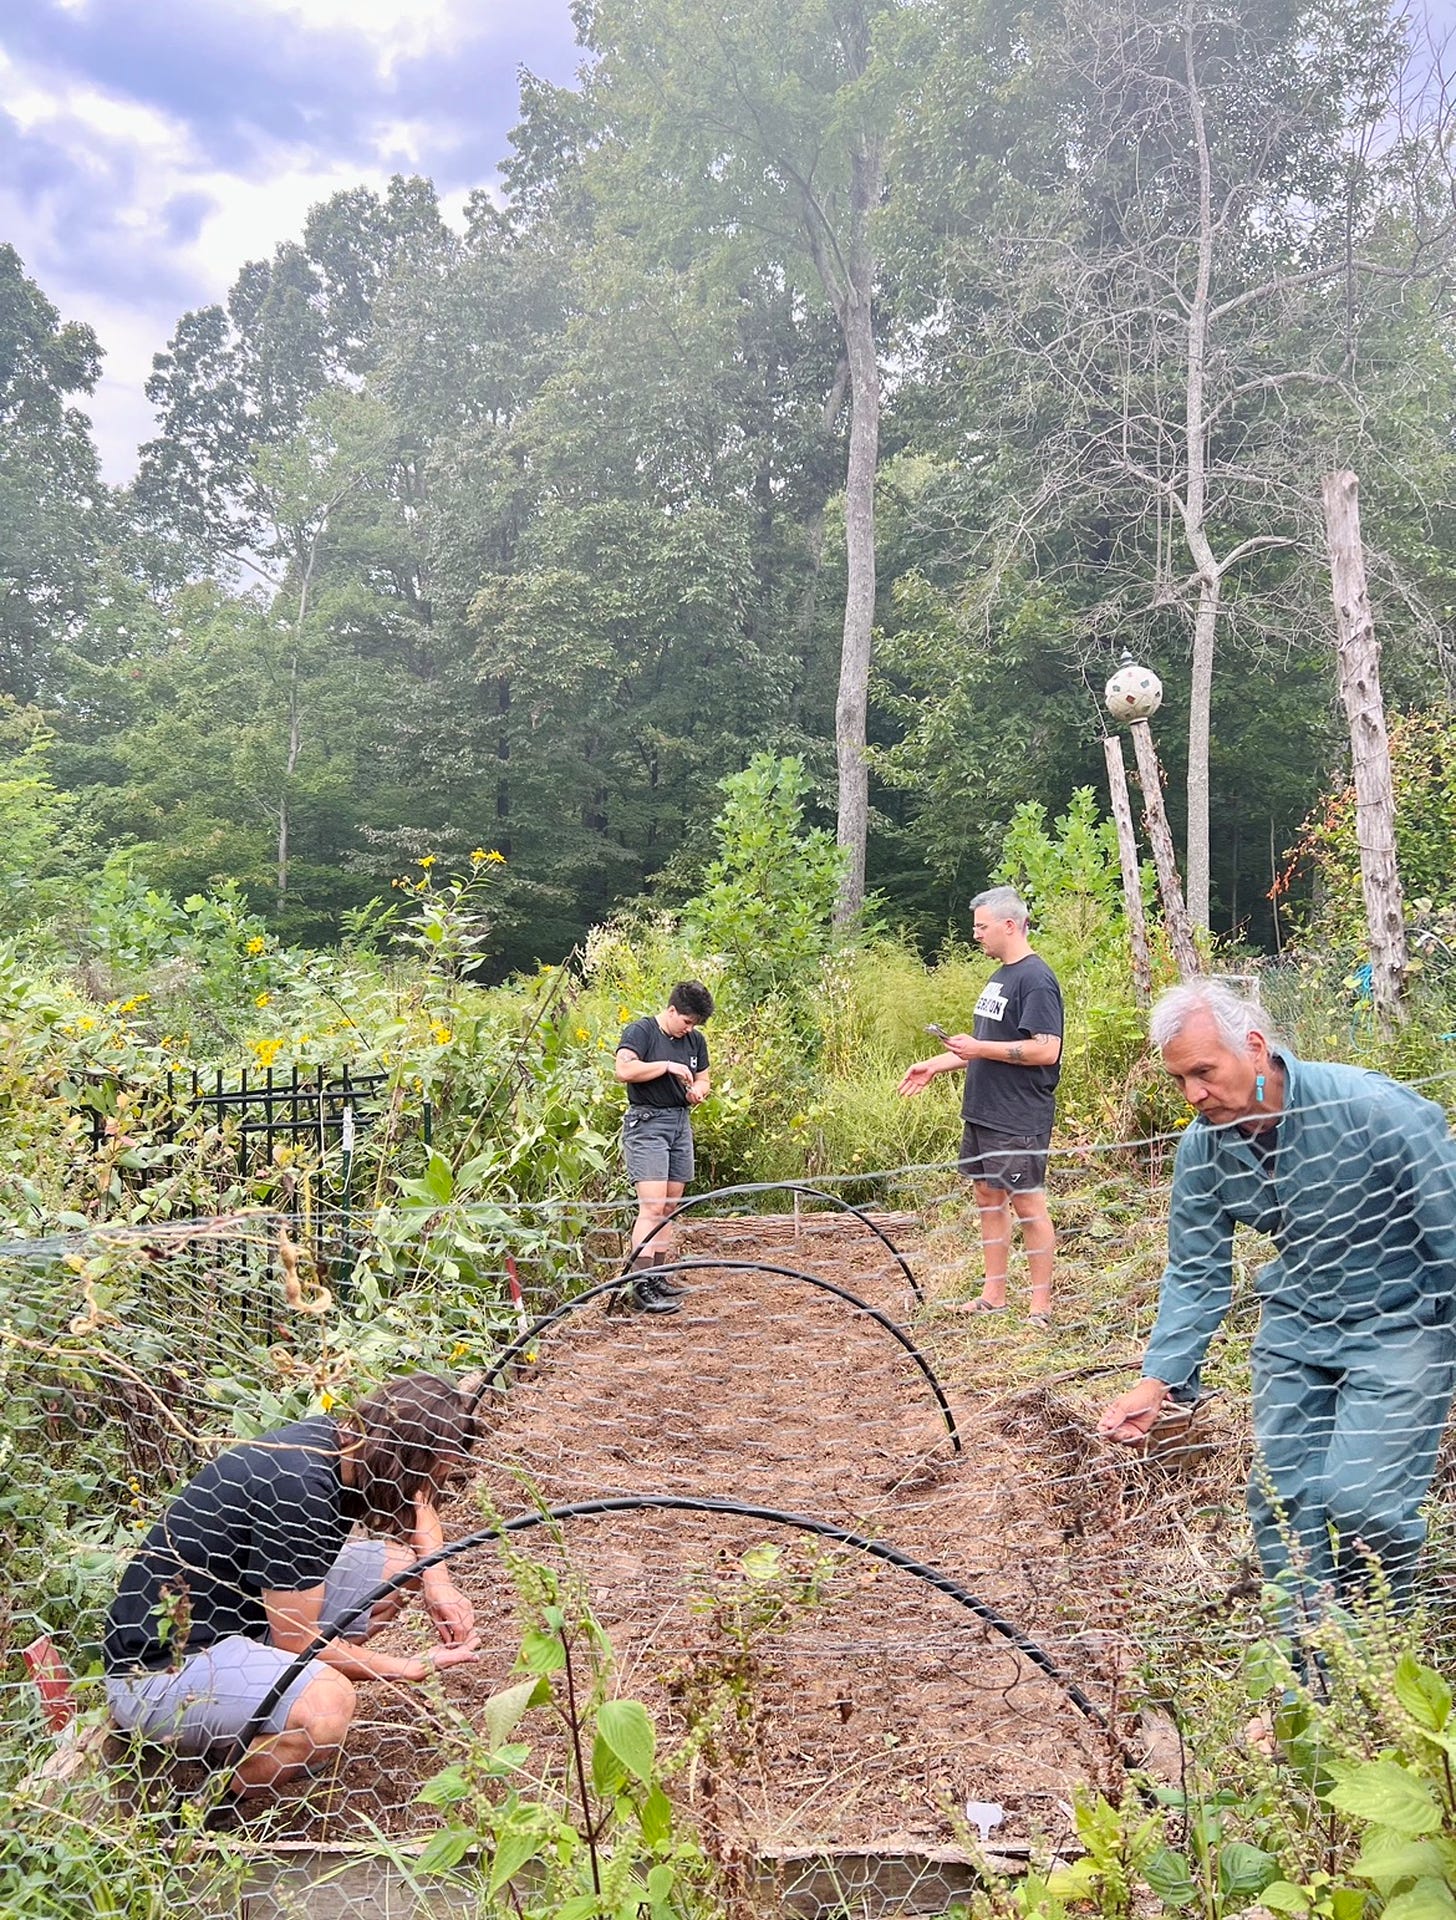 Four community members preparing a new gardening soil bed at a sanctuary farm in Middle Tennessee to plant seeds for vegetables, grains and herbs that can be harvested later this fall.